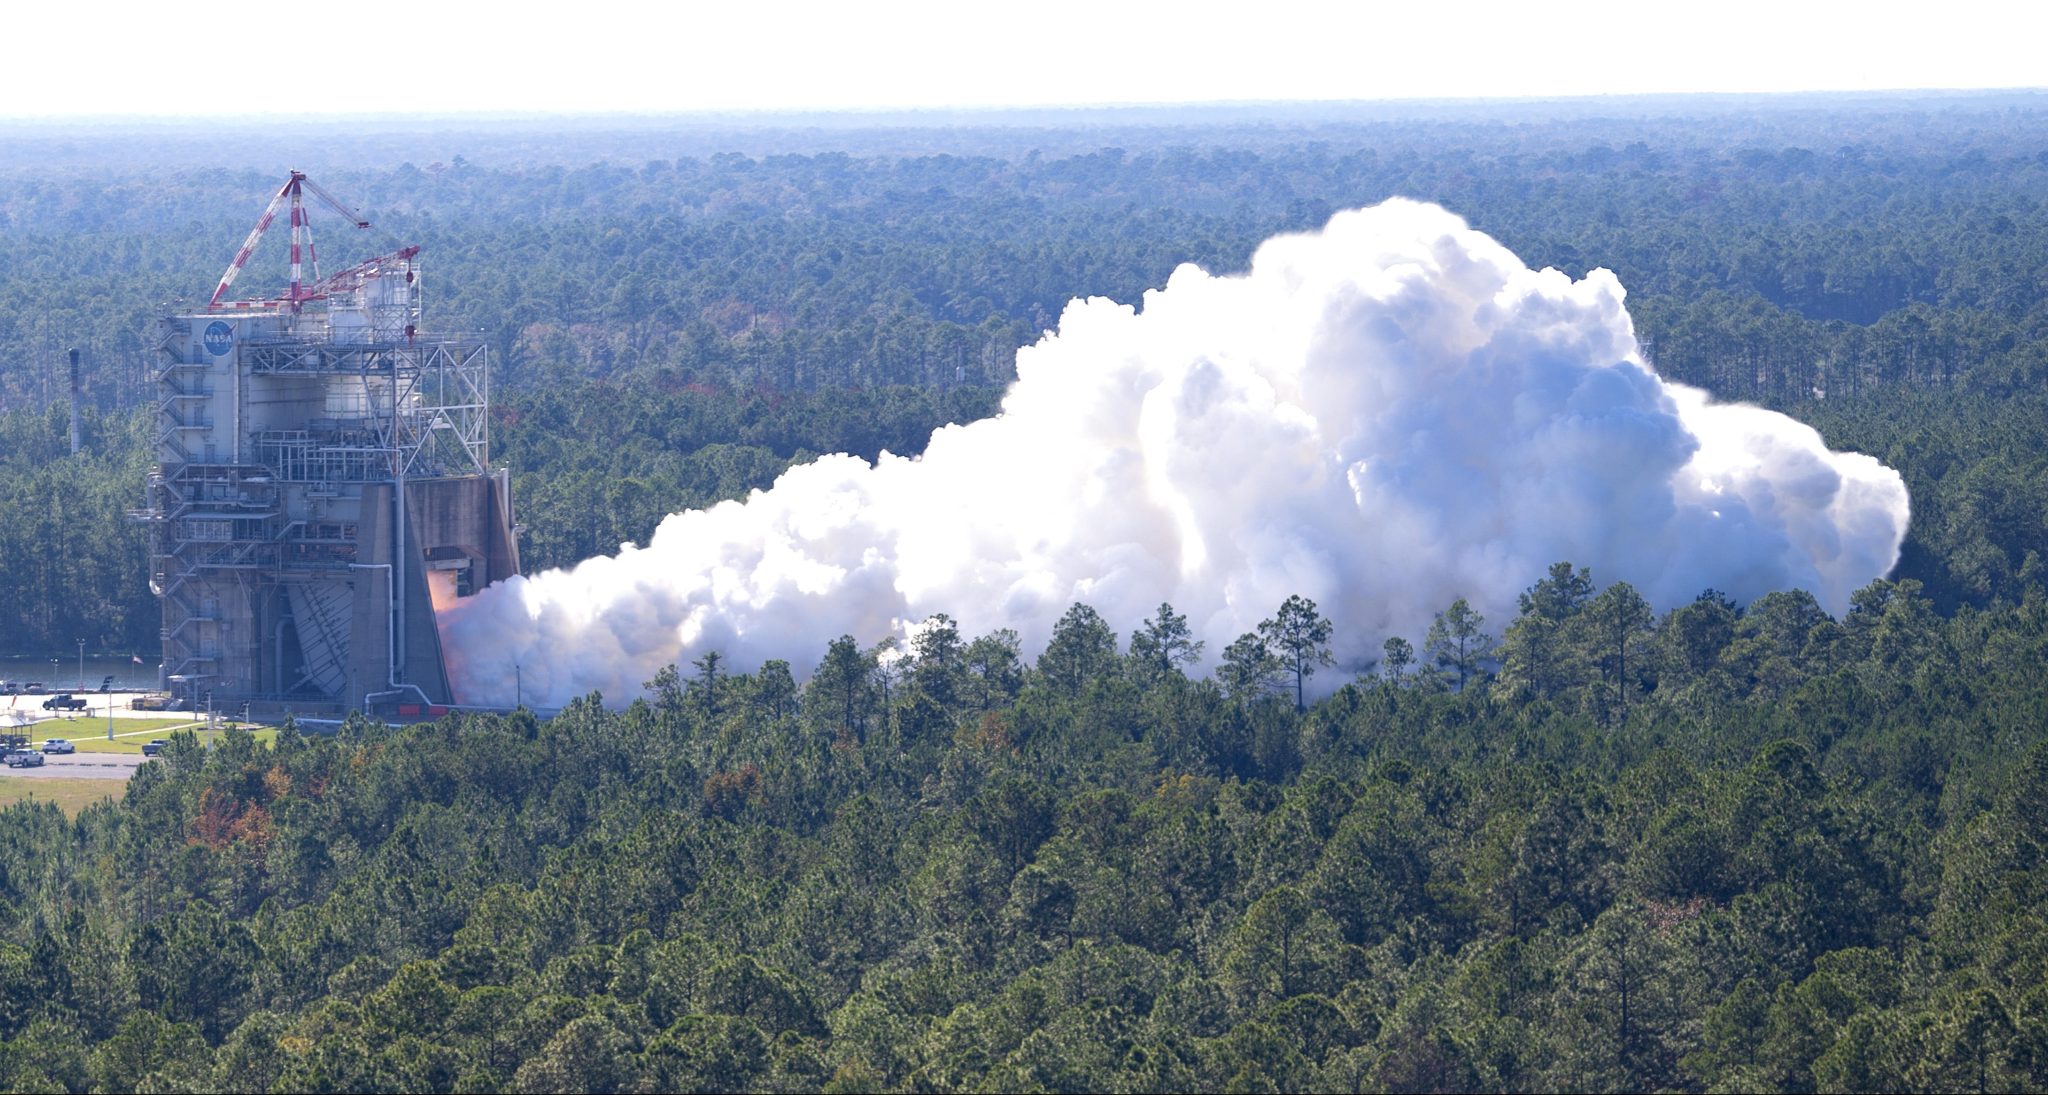 A full duration test of the RS-25 certification engine was conducted at NASA's Stennis Space Center on October 17, 2023.